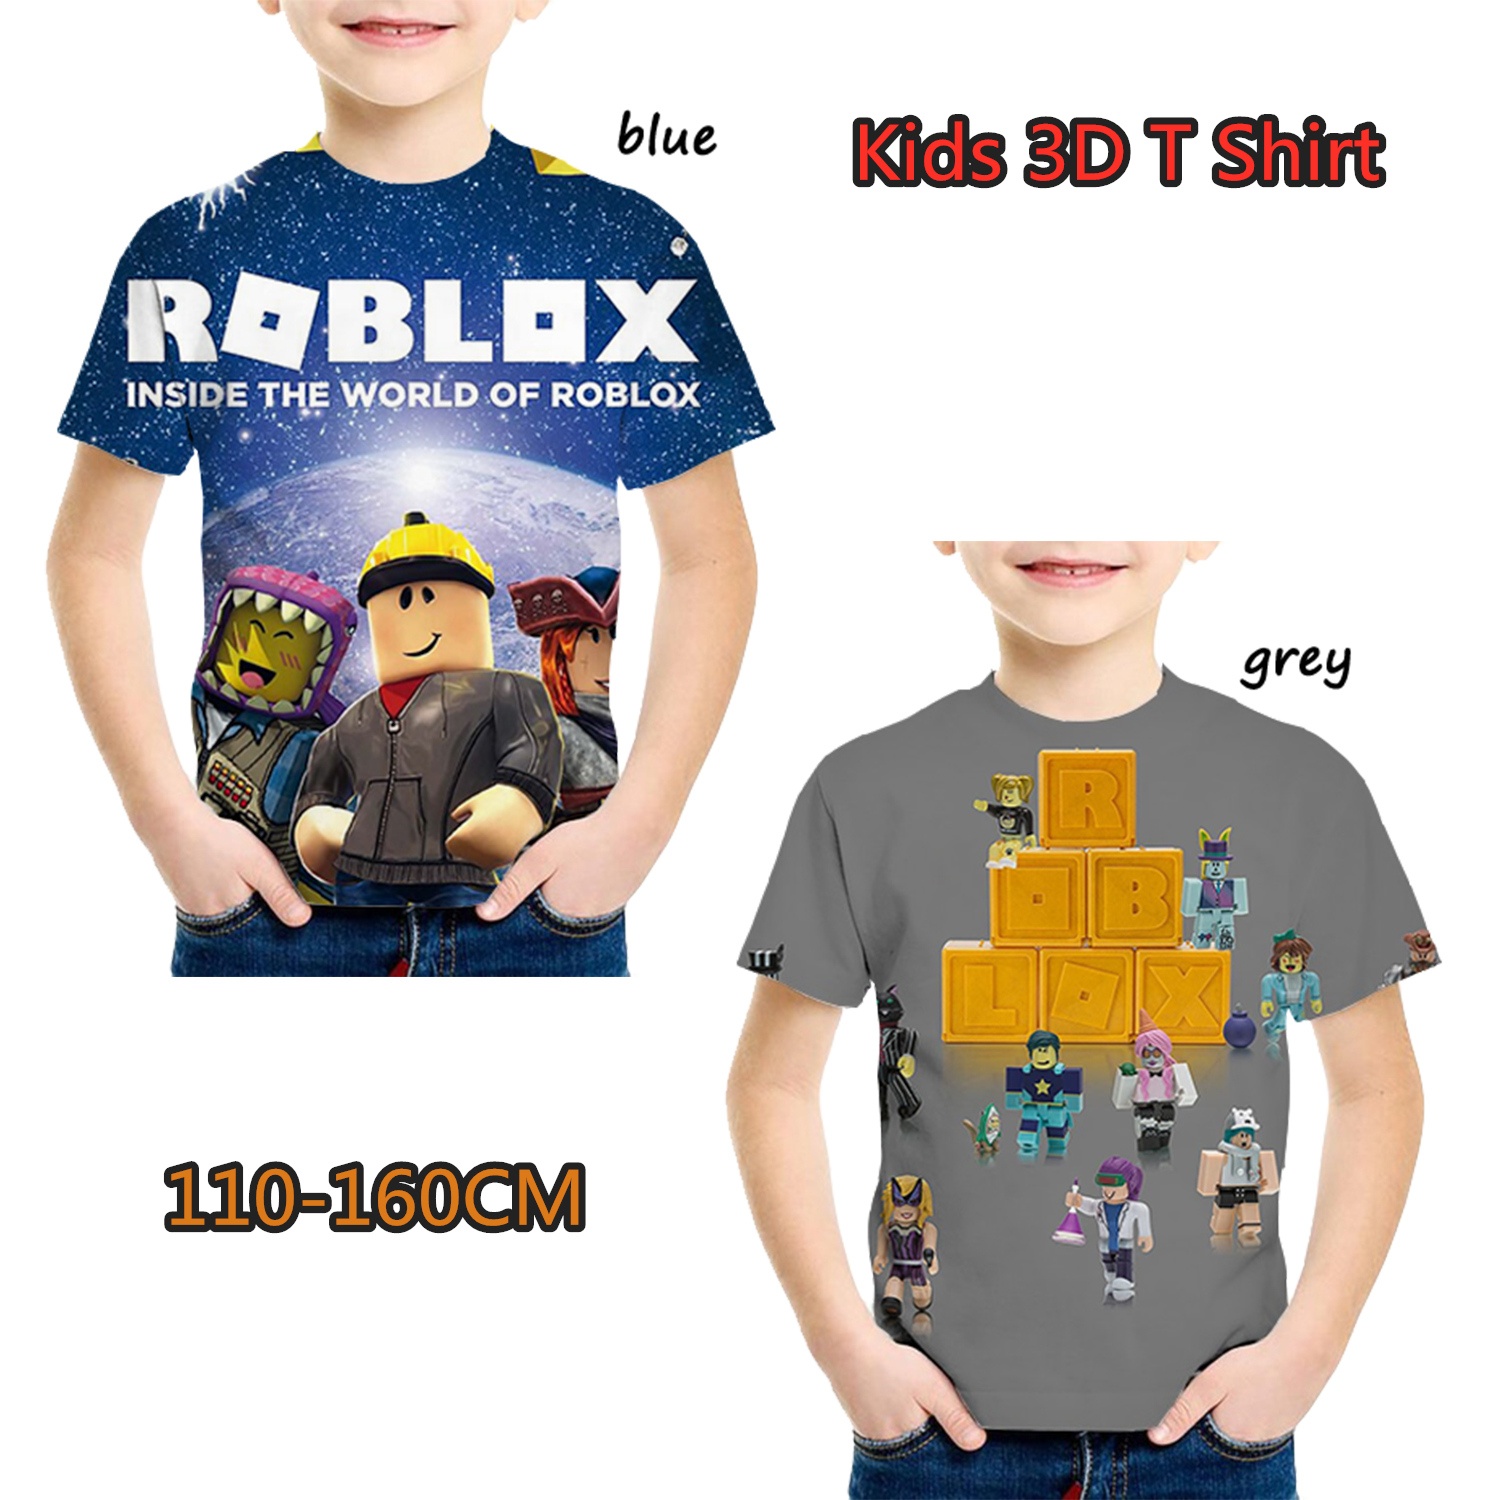 Fashion Cartoon Roblox 3d Printed Kids T Shirt Boys And Girls Funny Short Sleeve Round Neck Tees Wish - 2019 roblox game t shirts boys girl clothing kids summer 3d funny print tshirts costume children short sleeve clothes for baby ere66 from zwz1188